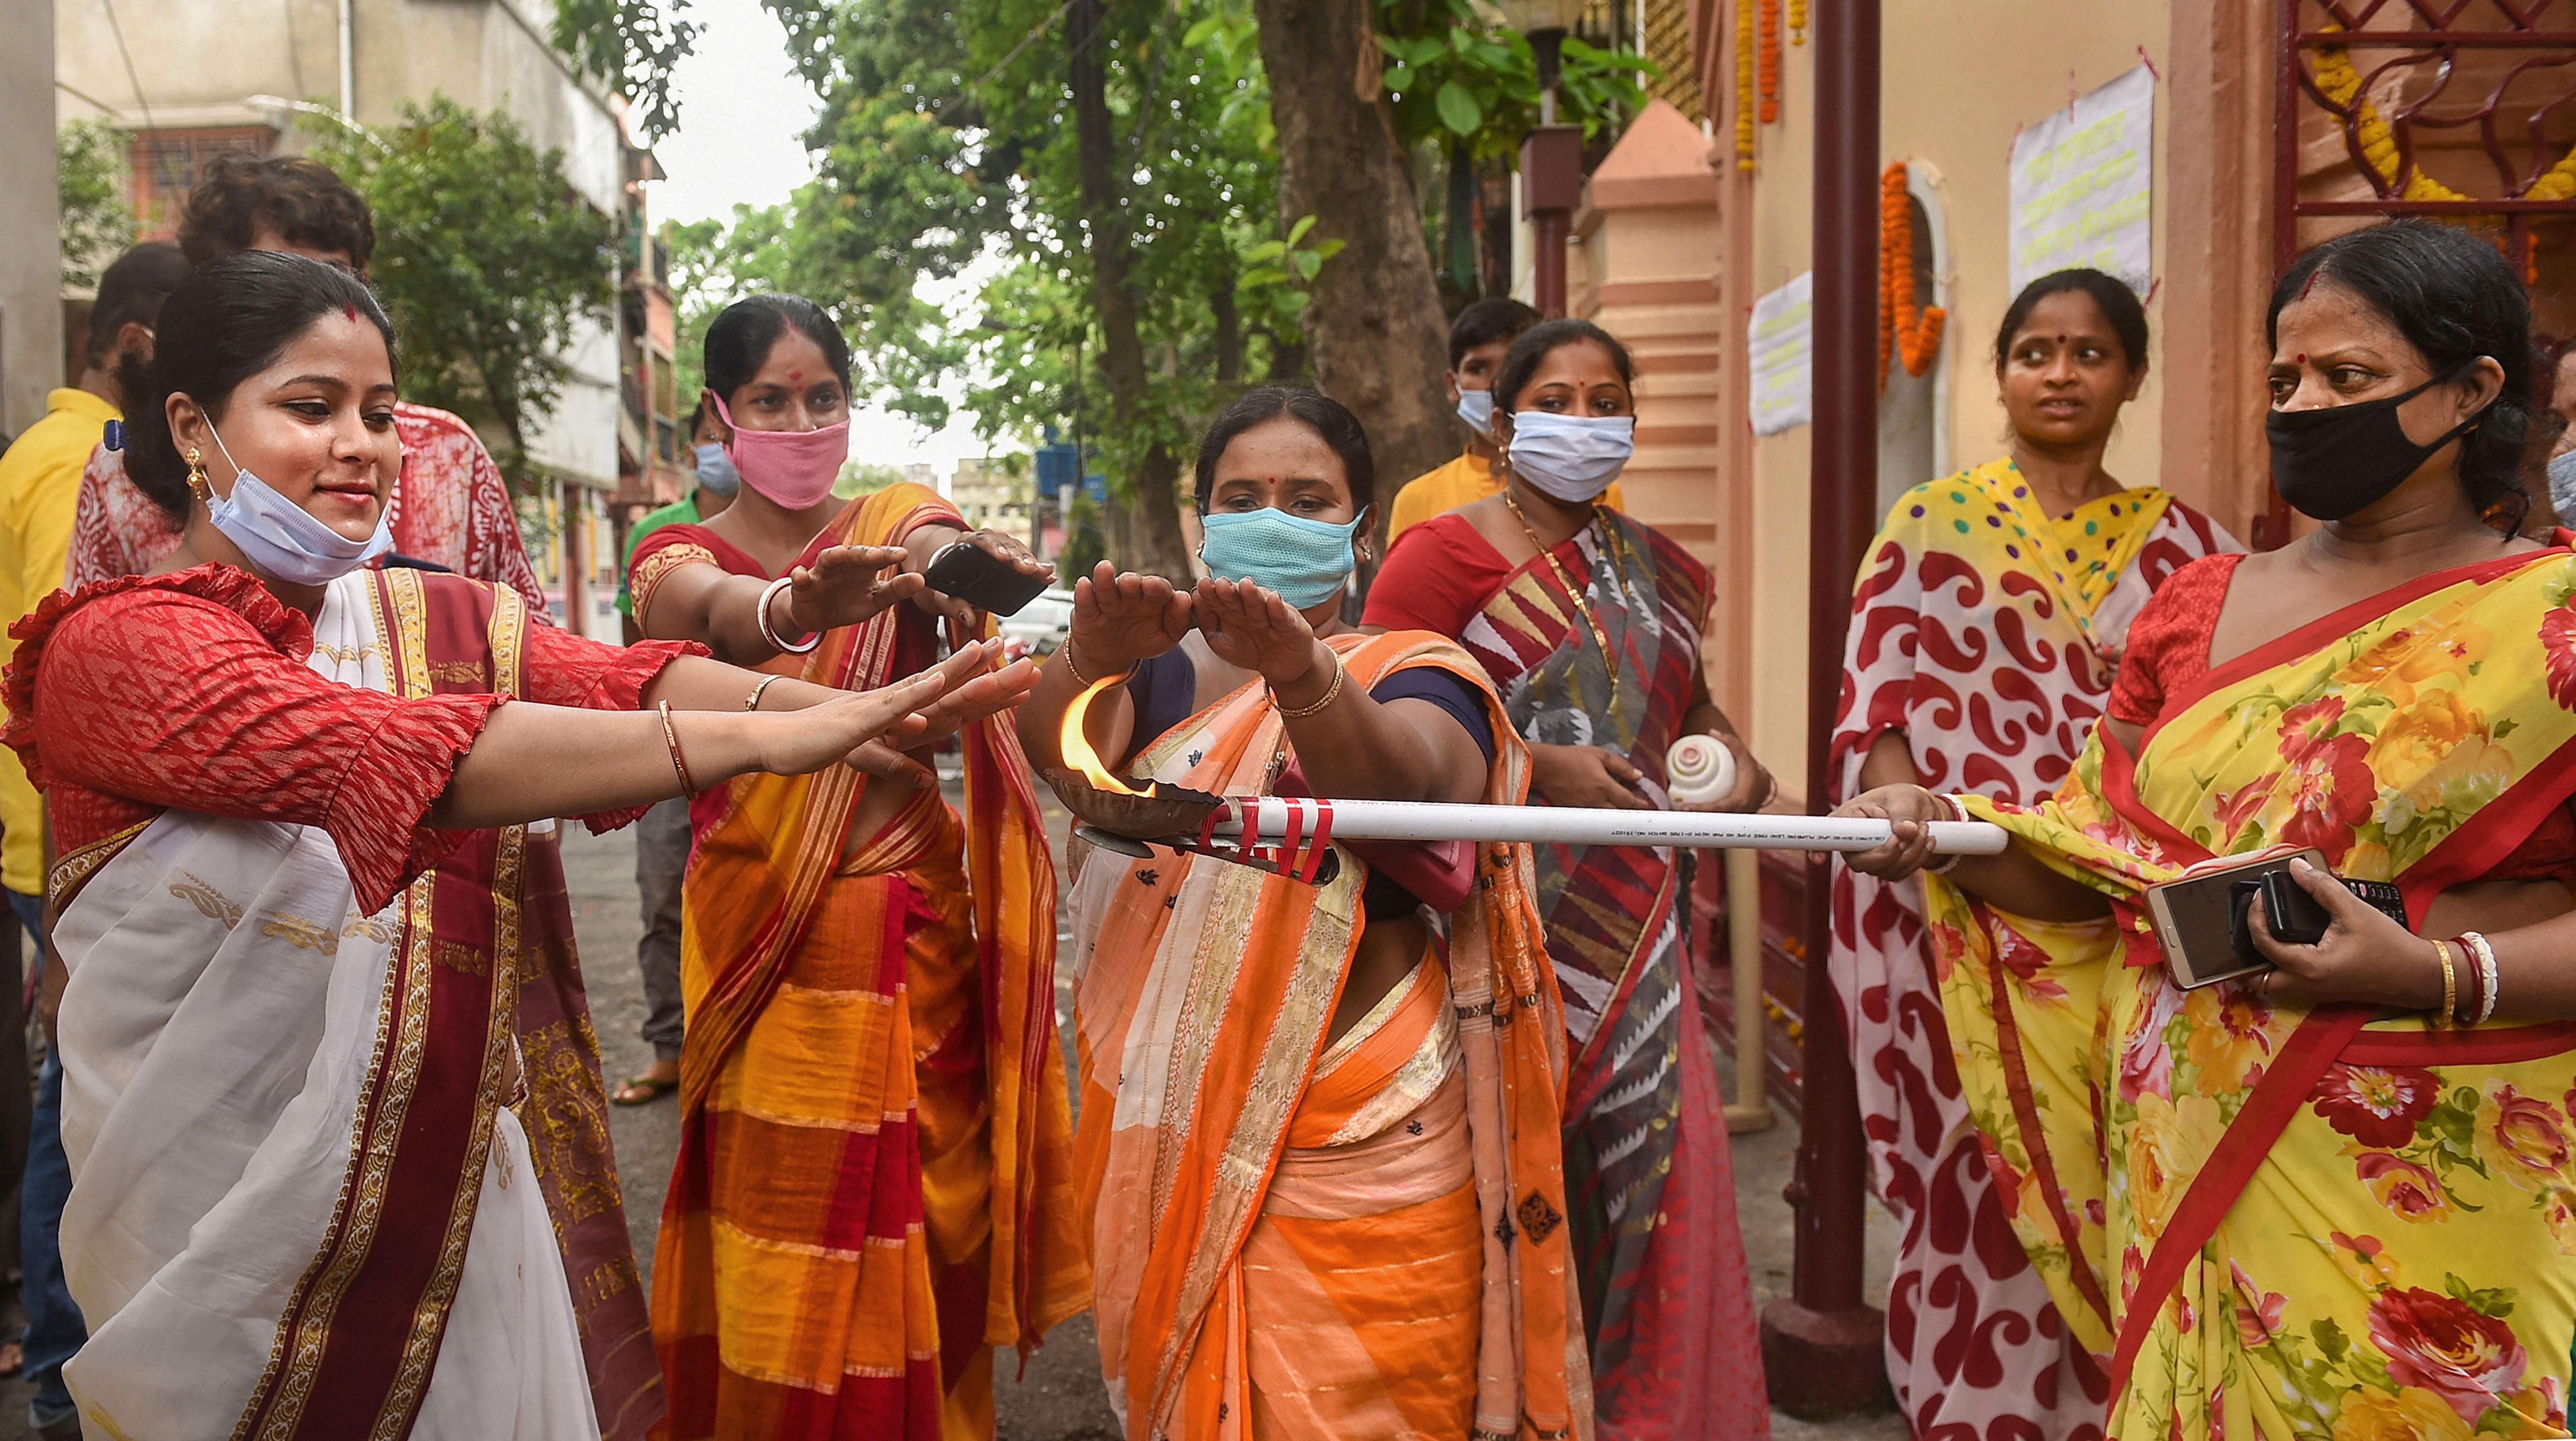 Devotees offer prayers to goddess Ganga at a temple on the occasion of Ganga Pooja, on the first day of COVID-19 lockdown 5.0, in Kolkata, Monday, June 1, 2020. (PTI Photo)